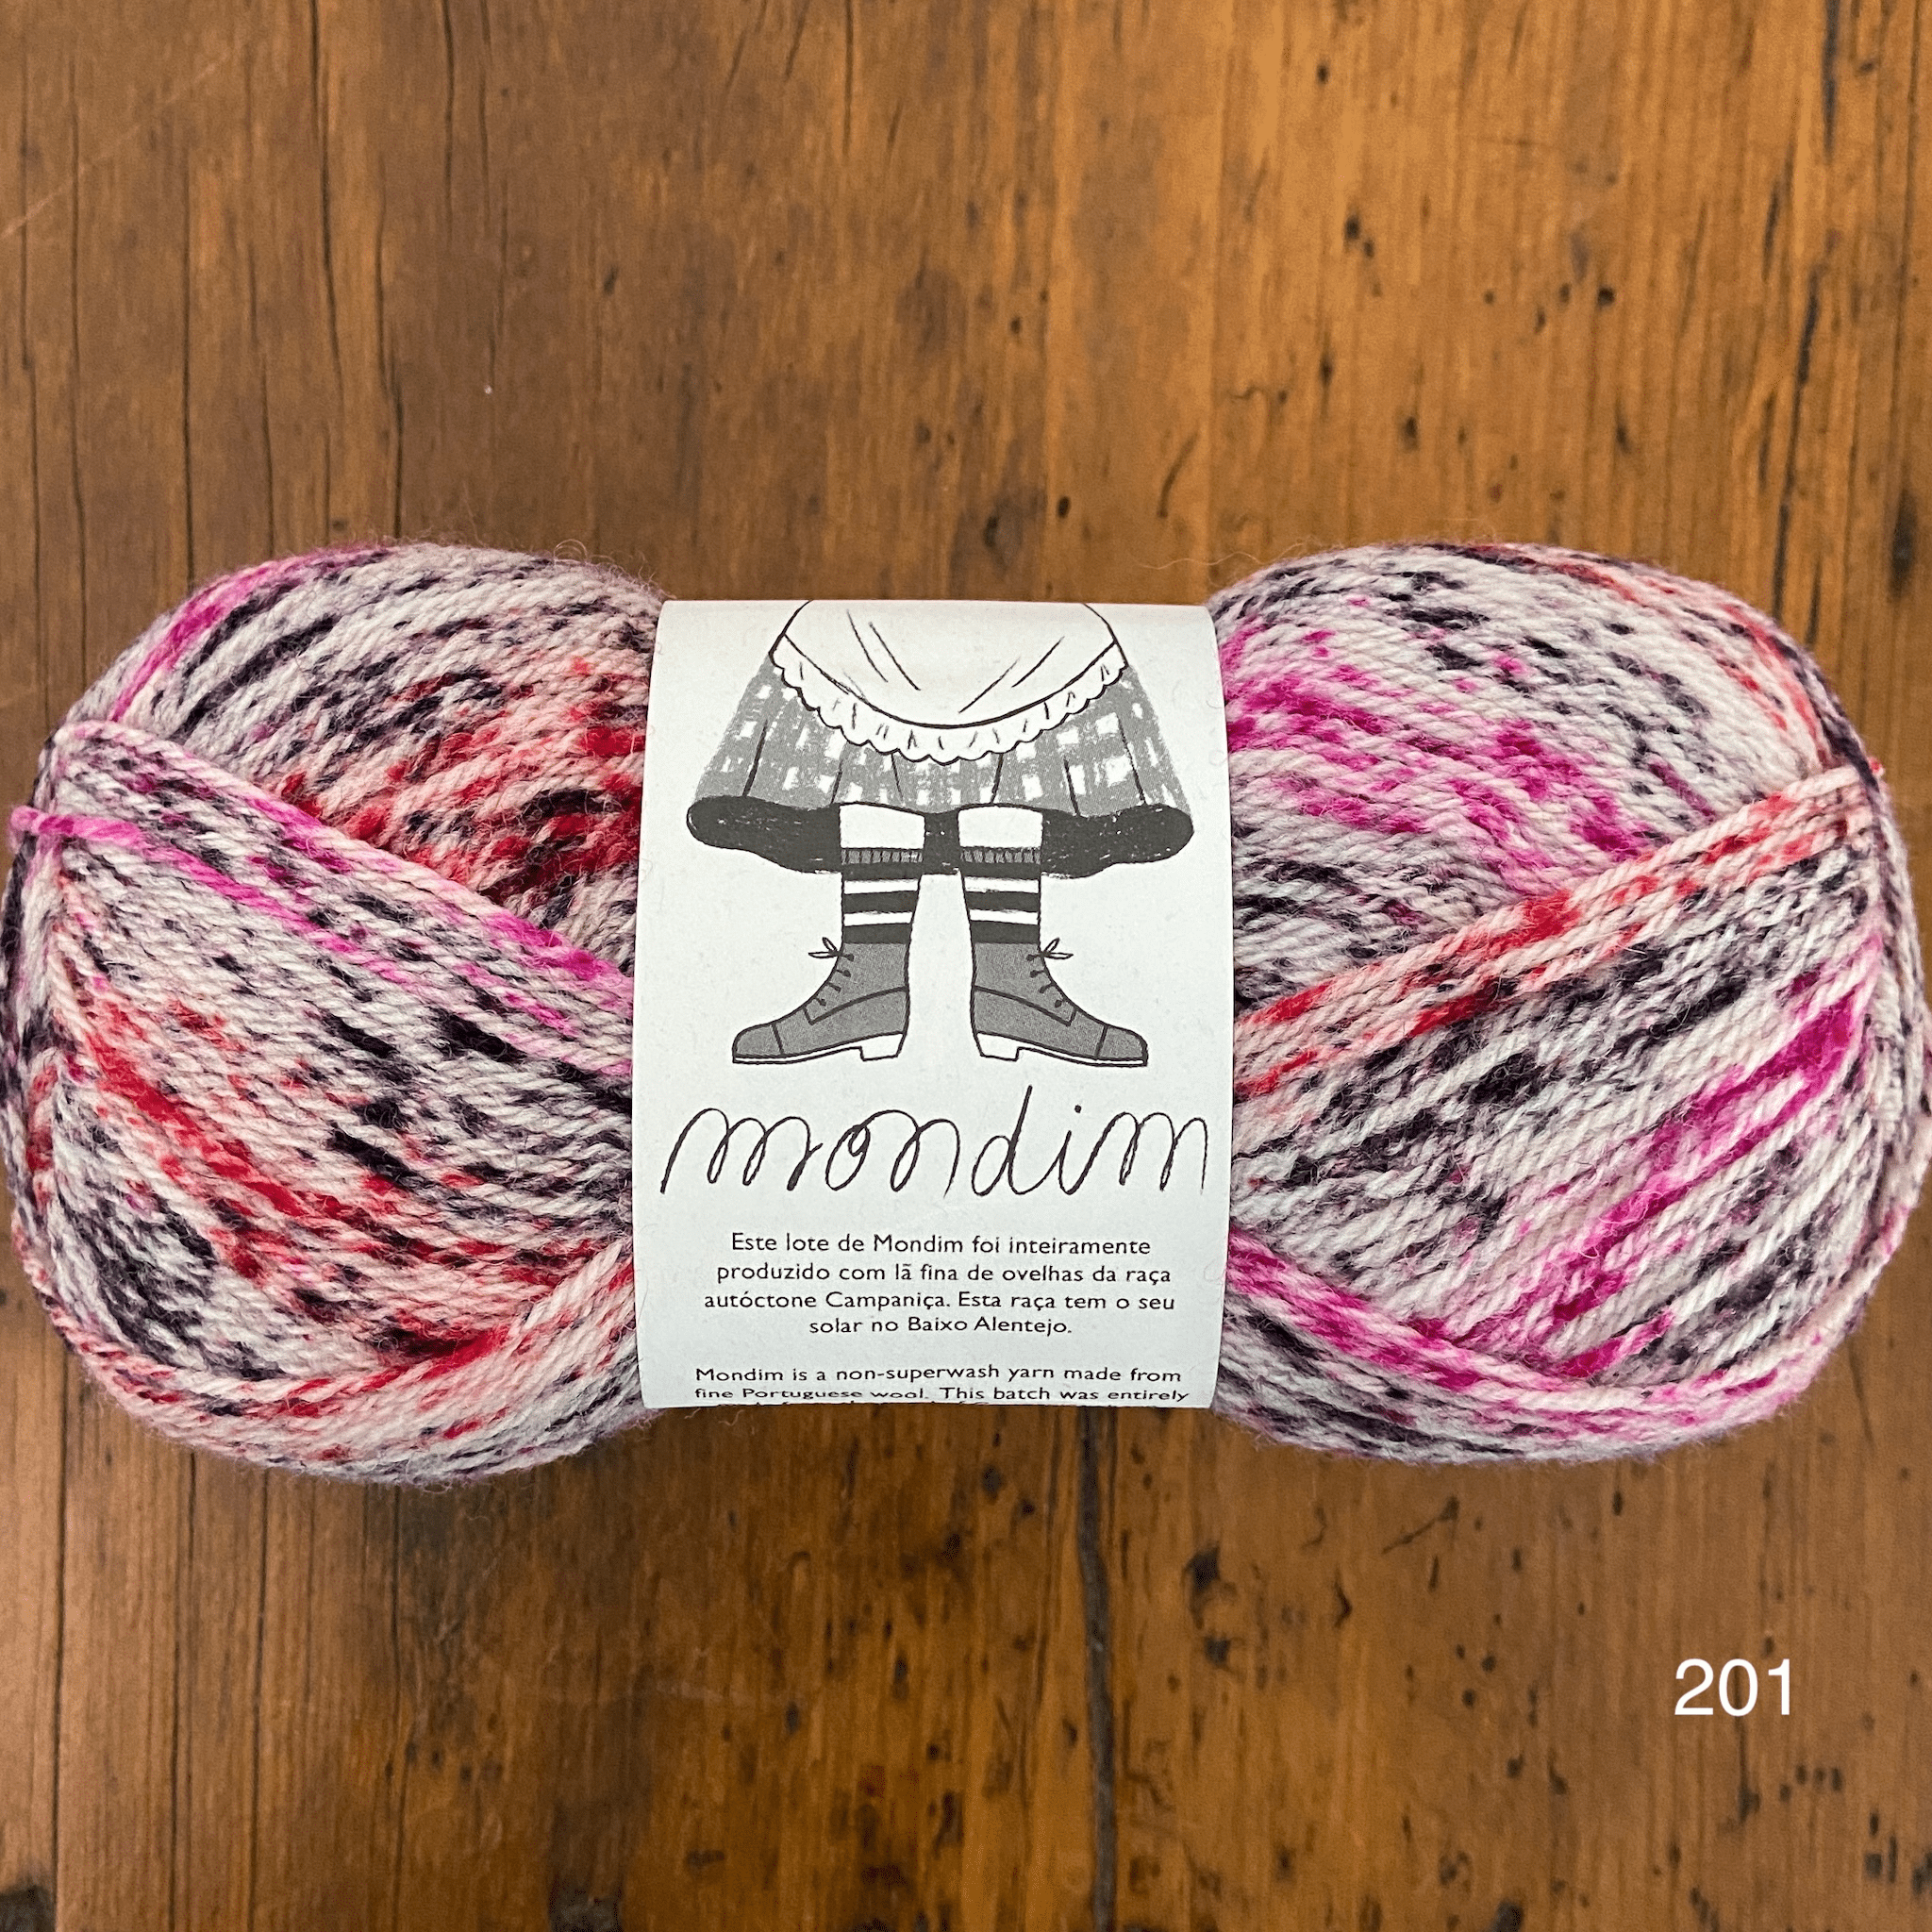 The Woolly Thistle Retrosaria Mondim Fingering Weight Yarn in 201 (mix of black, cream, pink, and red)